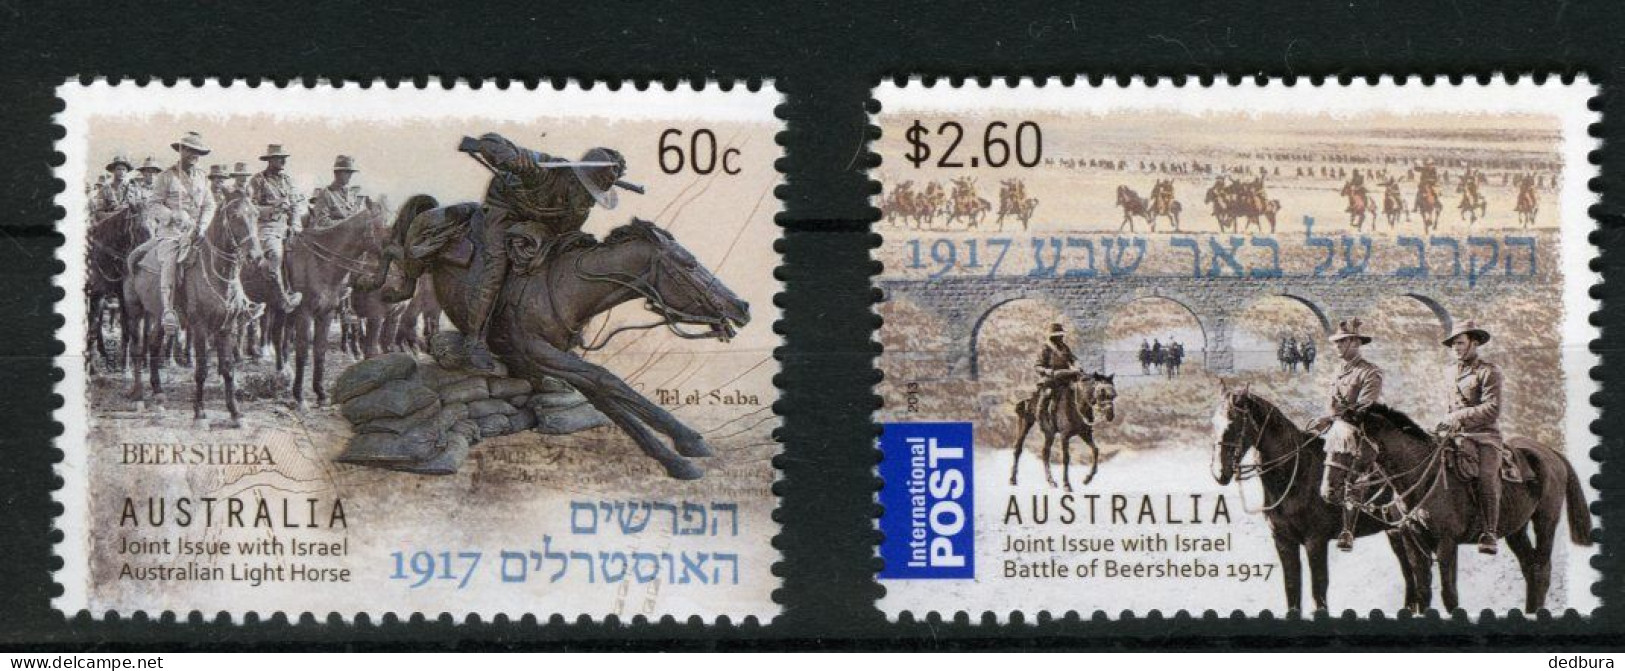 Australia-Israel Joint Issue 2013 - Battle Of Beersheba, 2 Complete Stamp Sets. Israel Stamps Without Tabs - Nuevos (sin Tab)